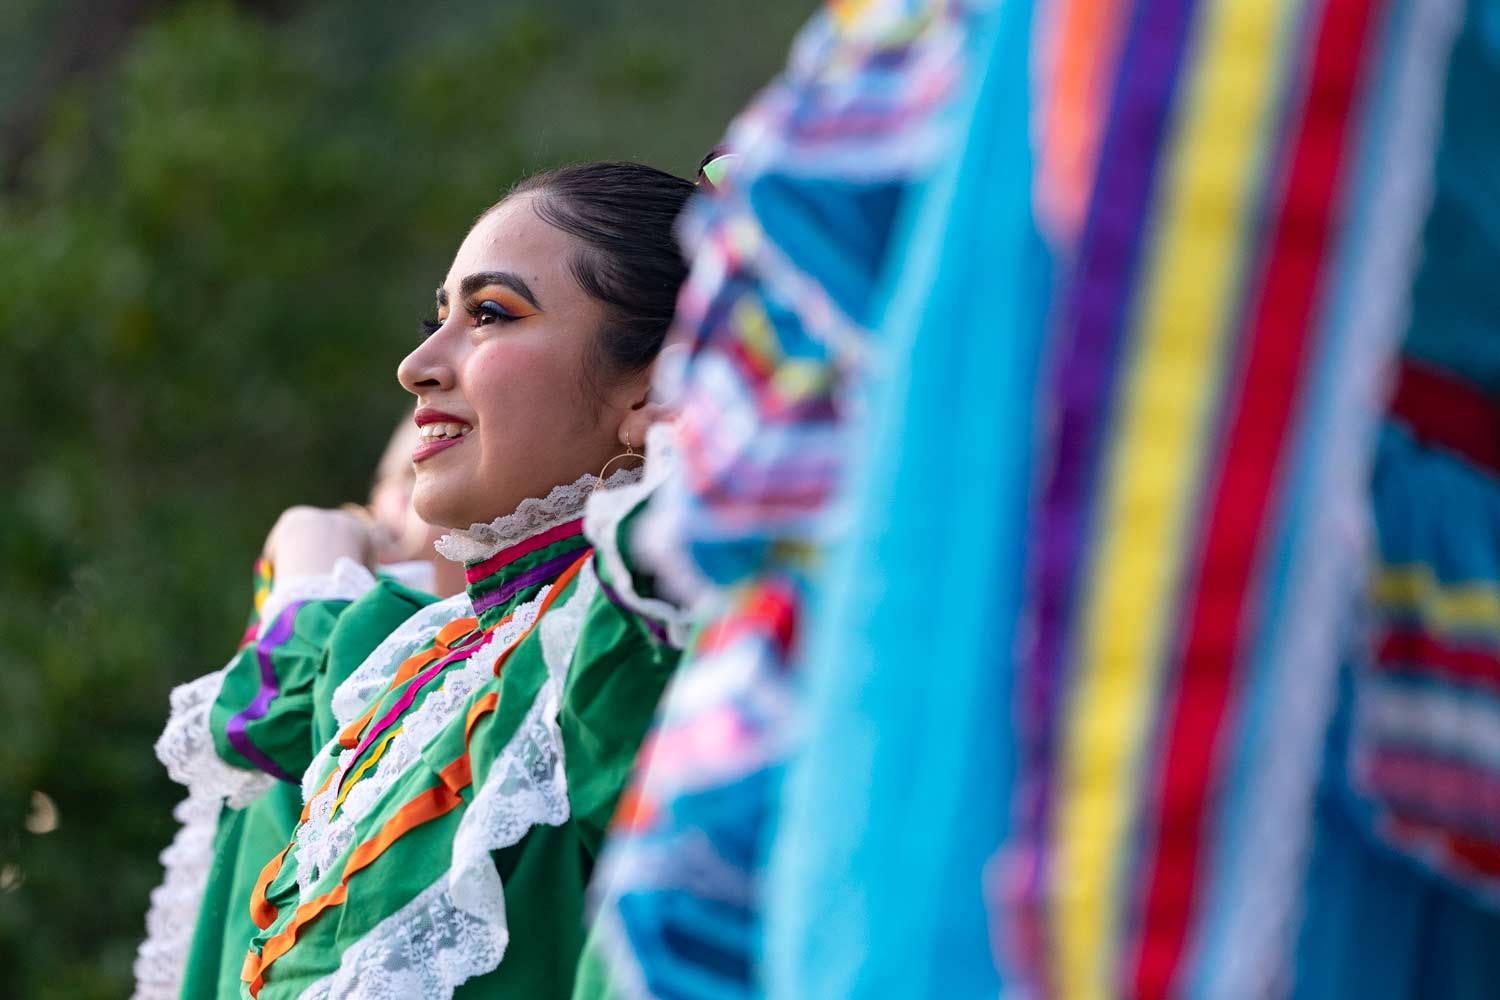 Texas A&M student performing a traditional dance in Aggie Park for Hispanic Heritage Month